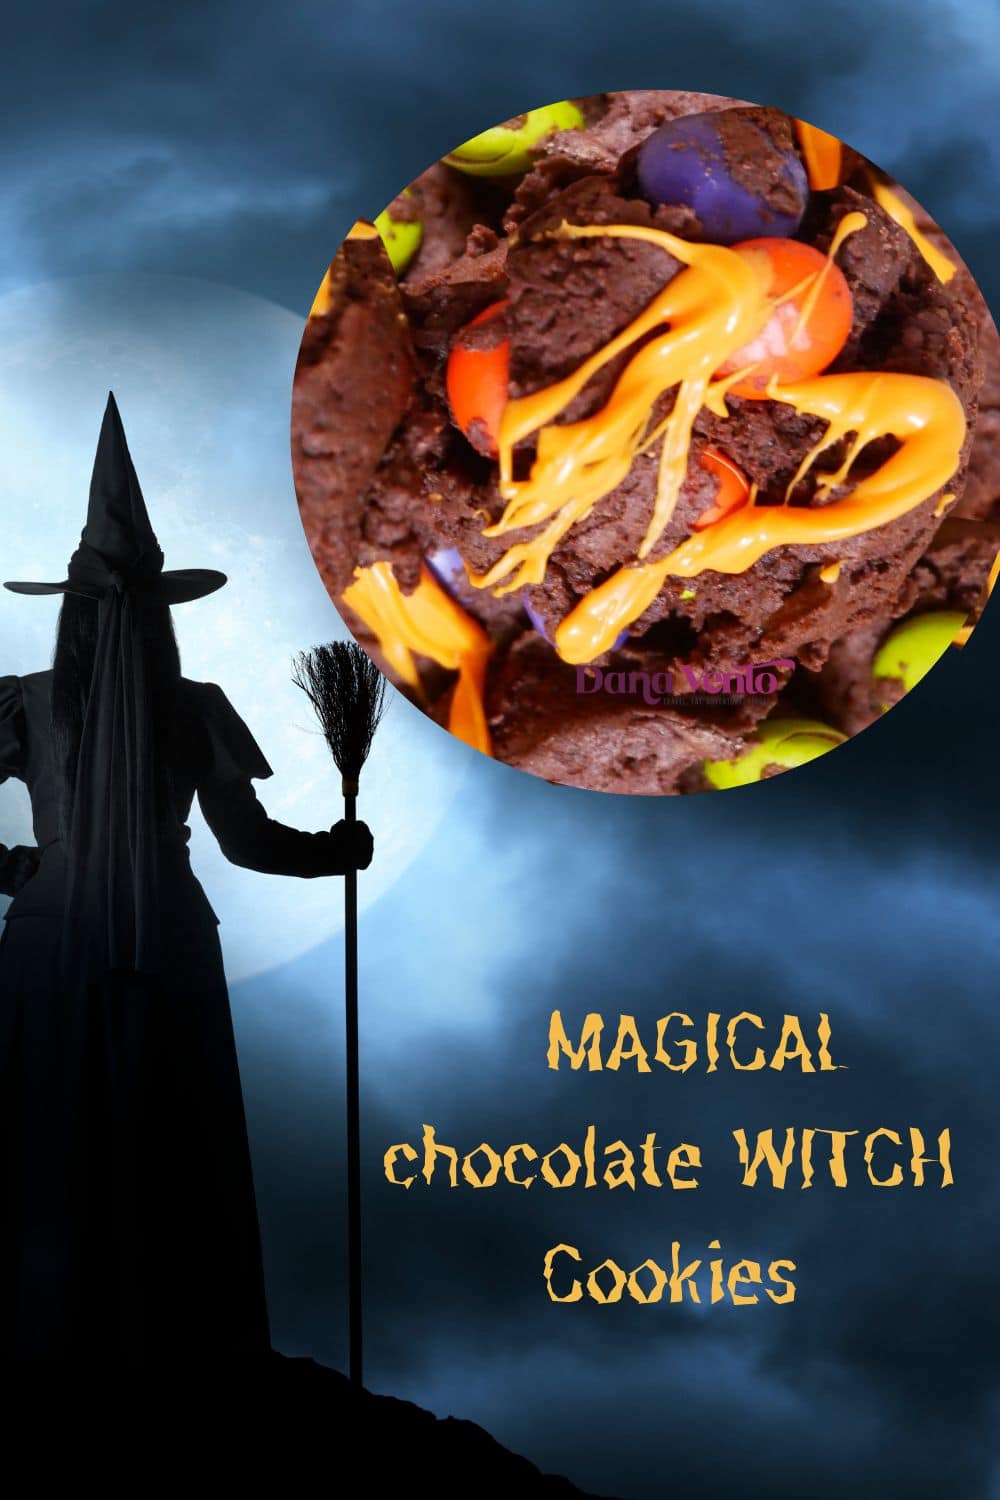 Magical chocolate witch cookies